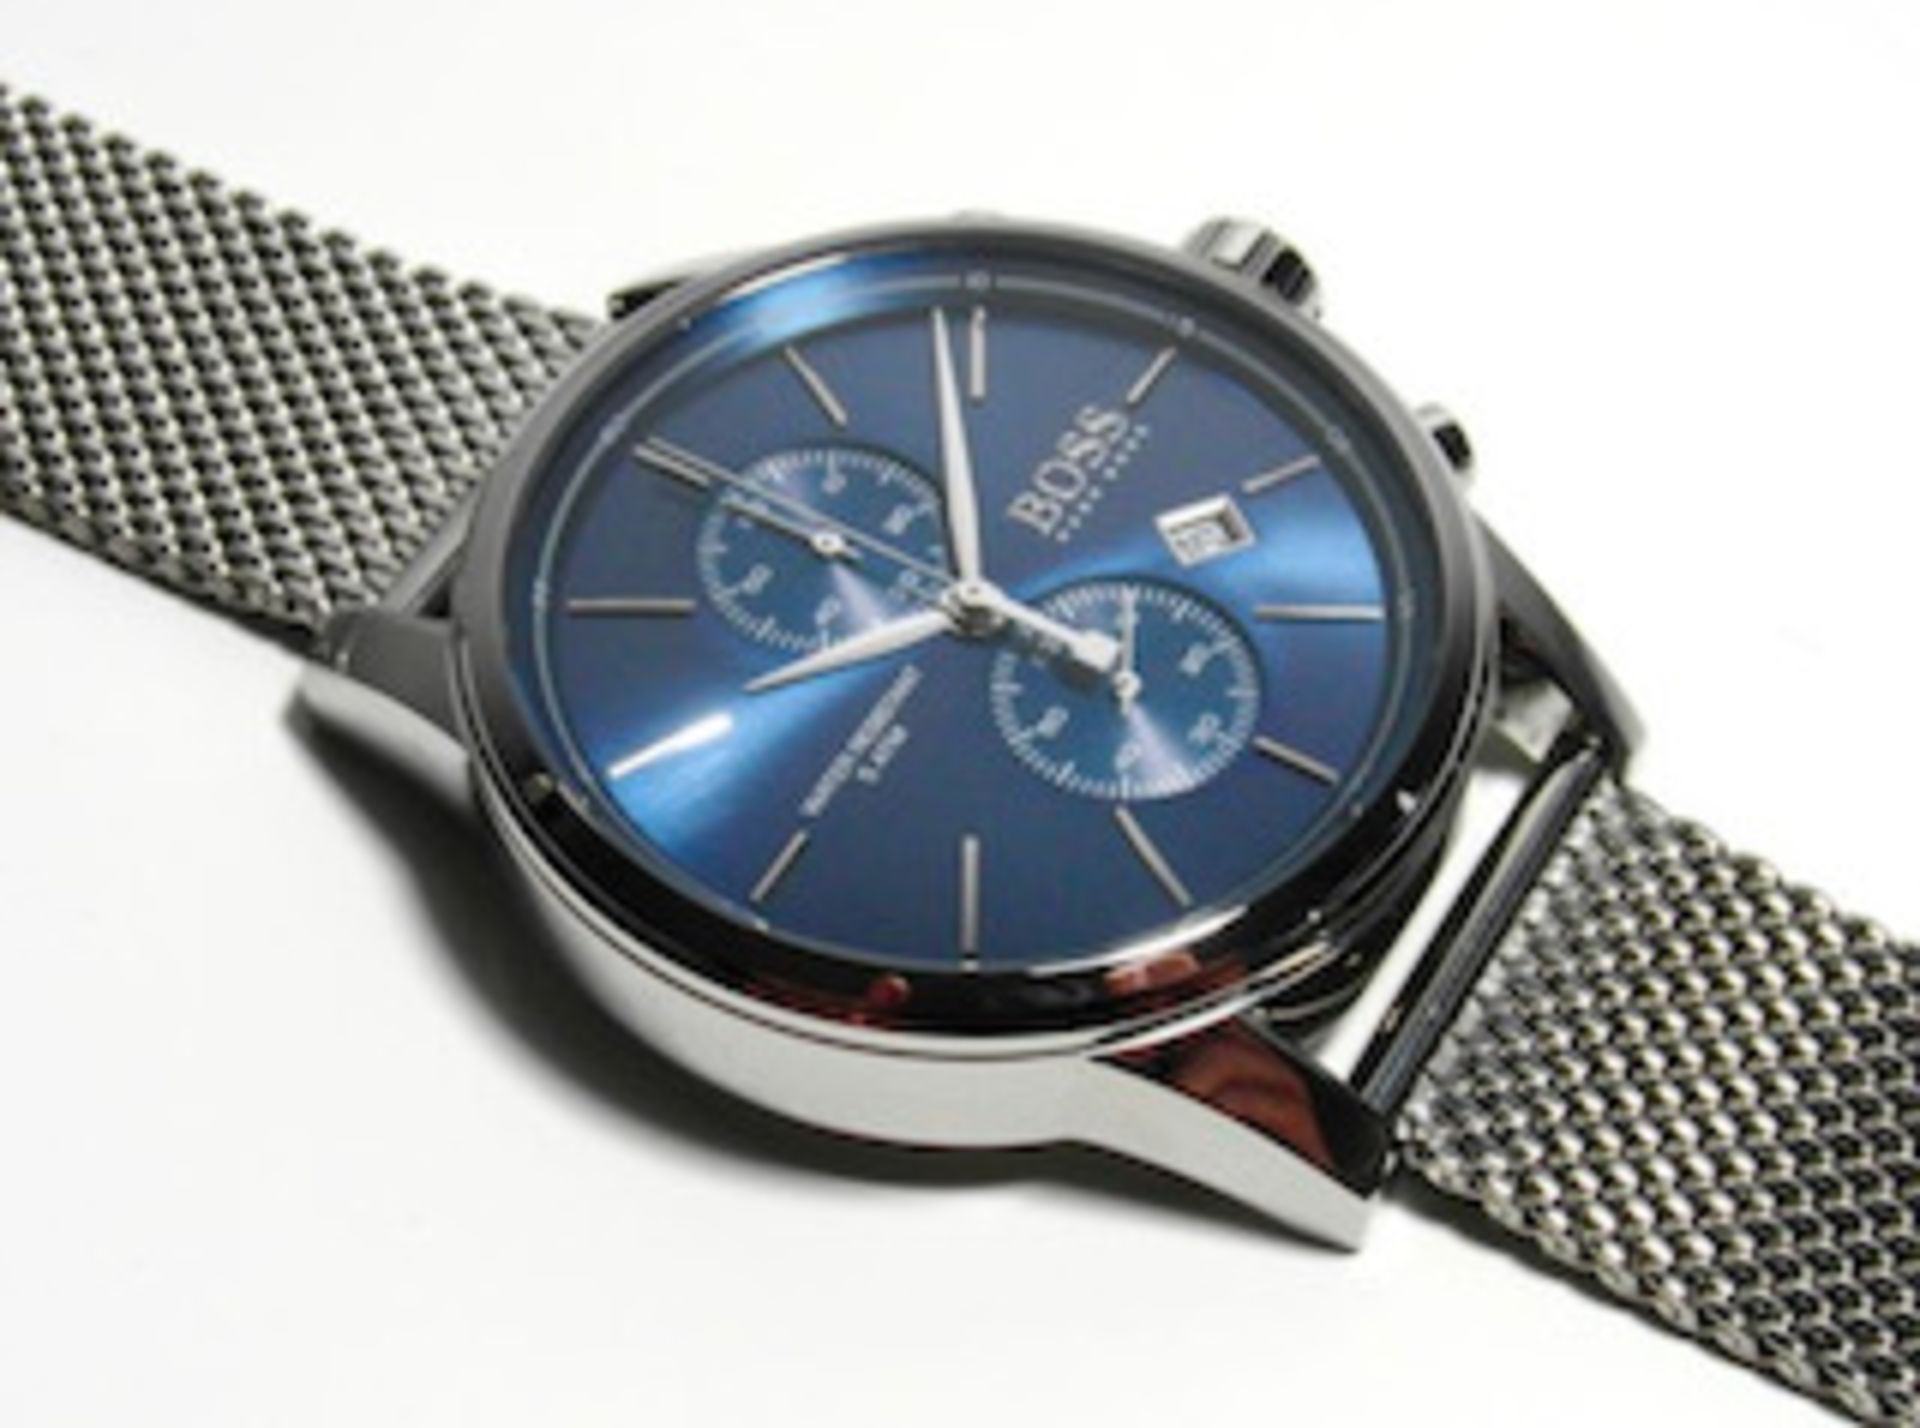 Hugo Boss 1513441 Men's Jet Blue Dial Silver Mesh Band Chronograph Watch - Image 4 of 5